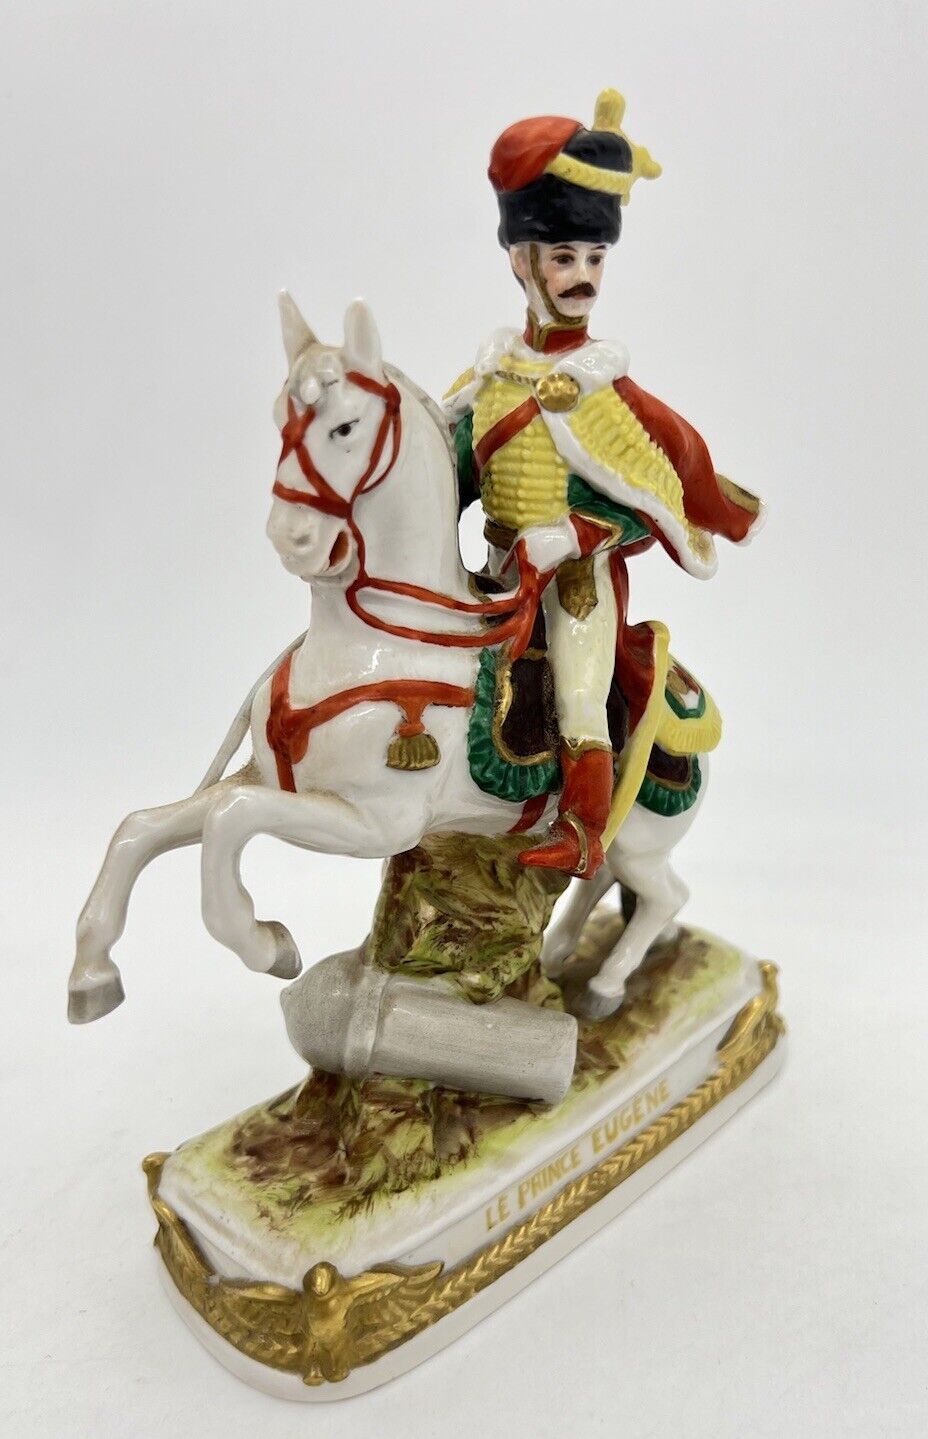 Scheibe alsbach marked German porcelain Napoleon LE PRINCE EUGENE 6”x5” 🐎